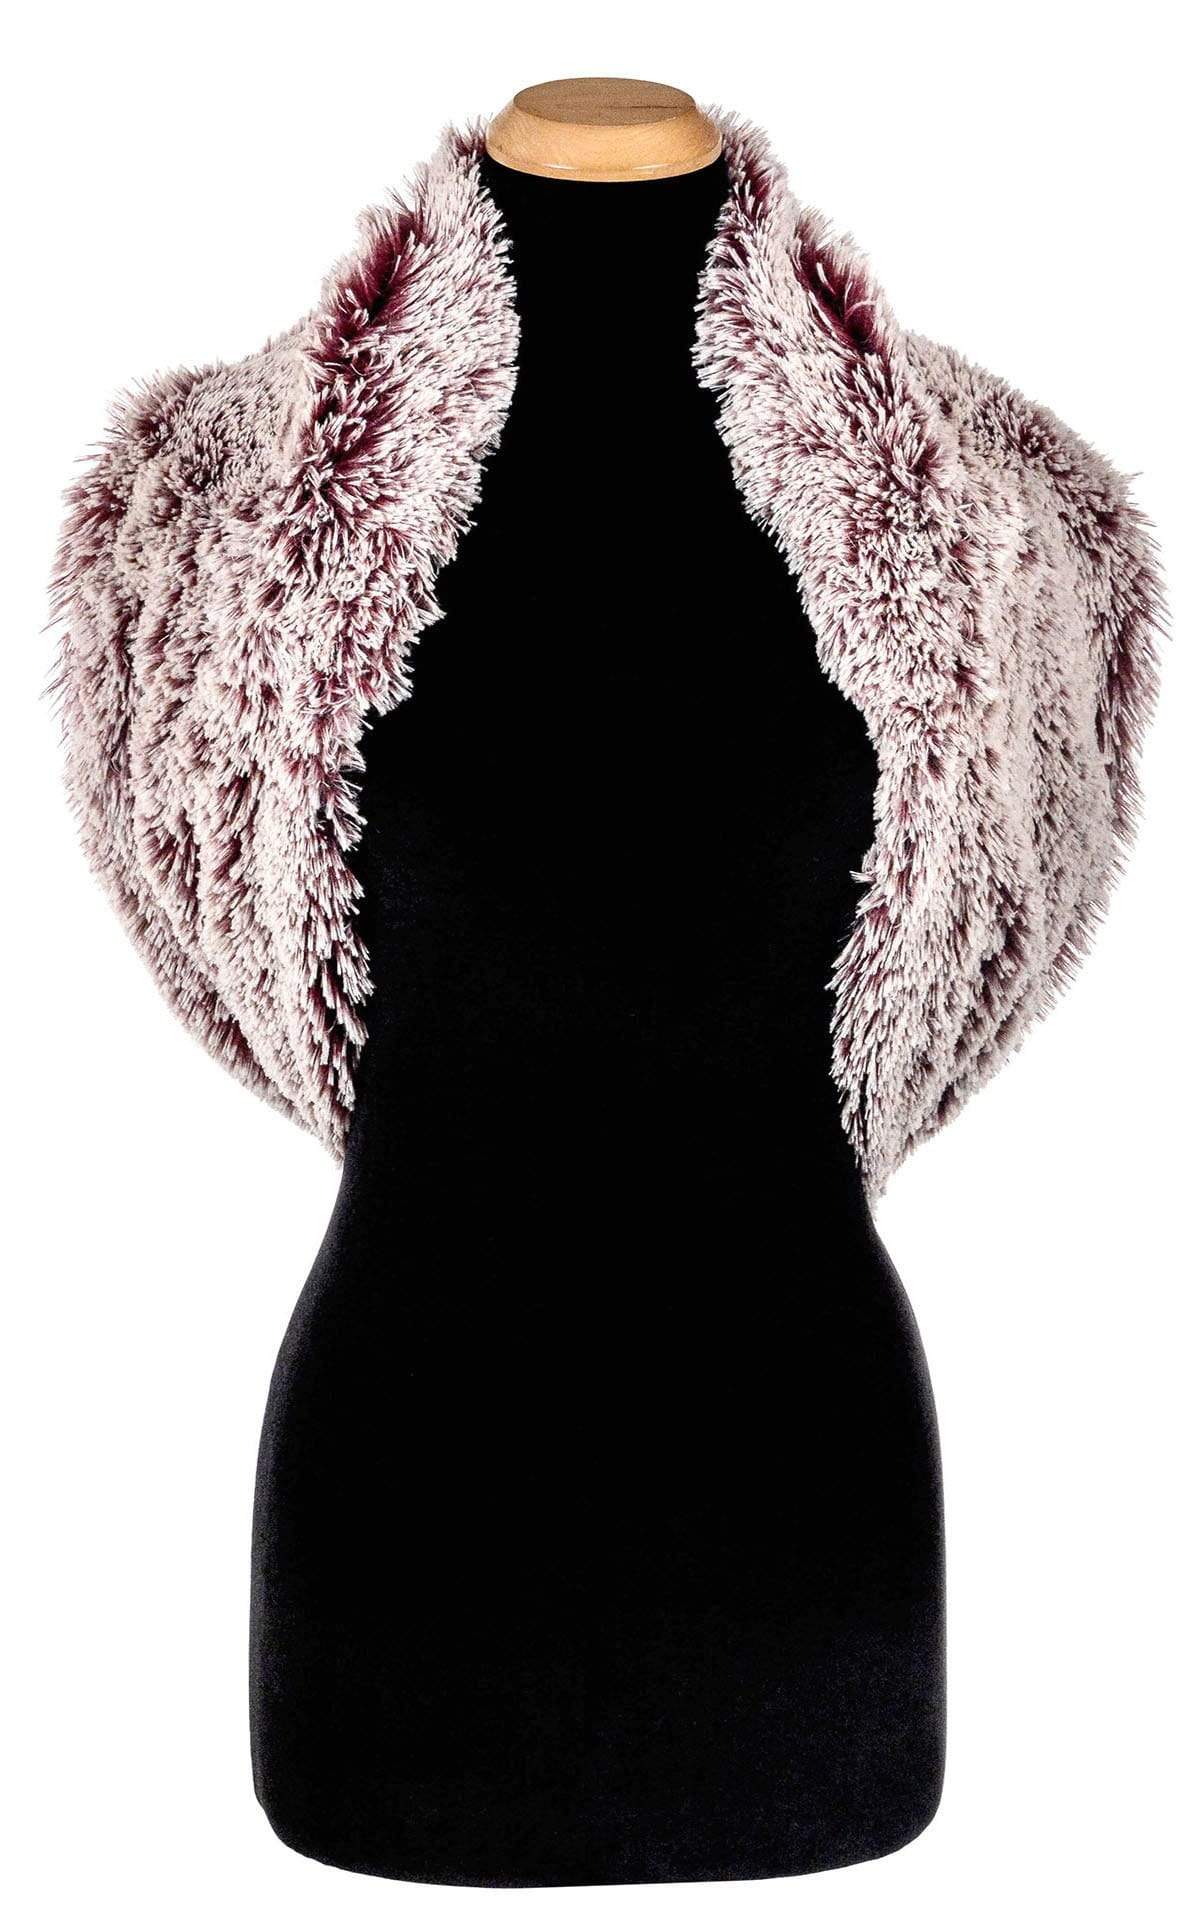 Double Cowl Shrug - Berry Foxy with Cranberry Creek (Limited Availability)